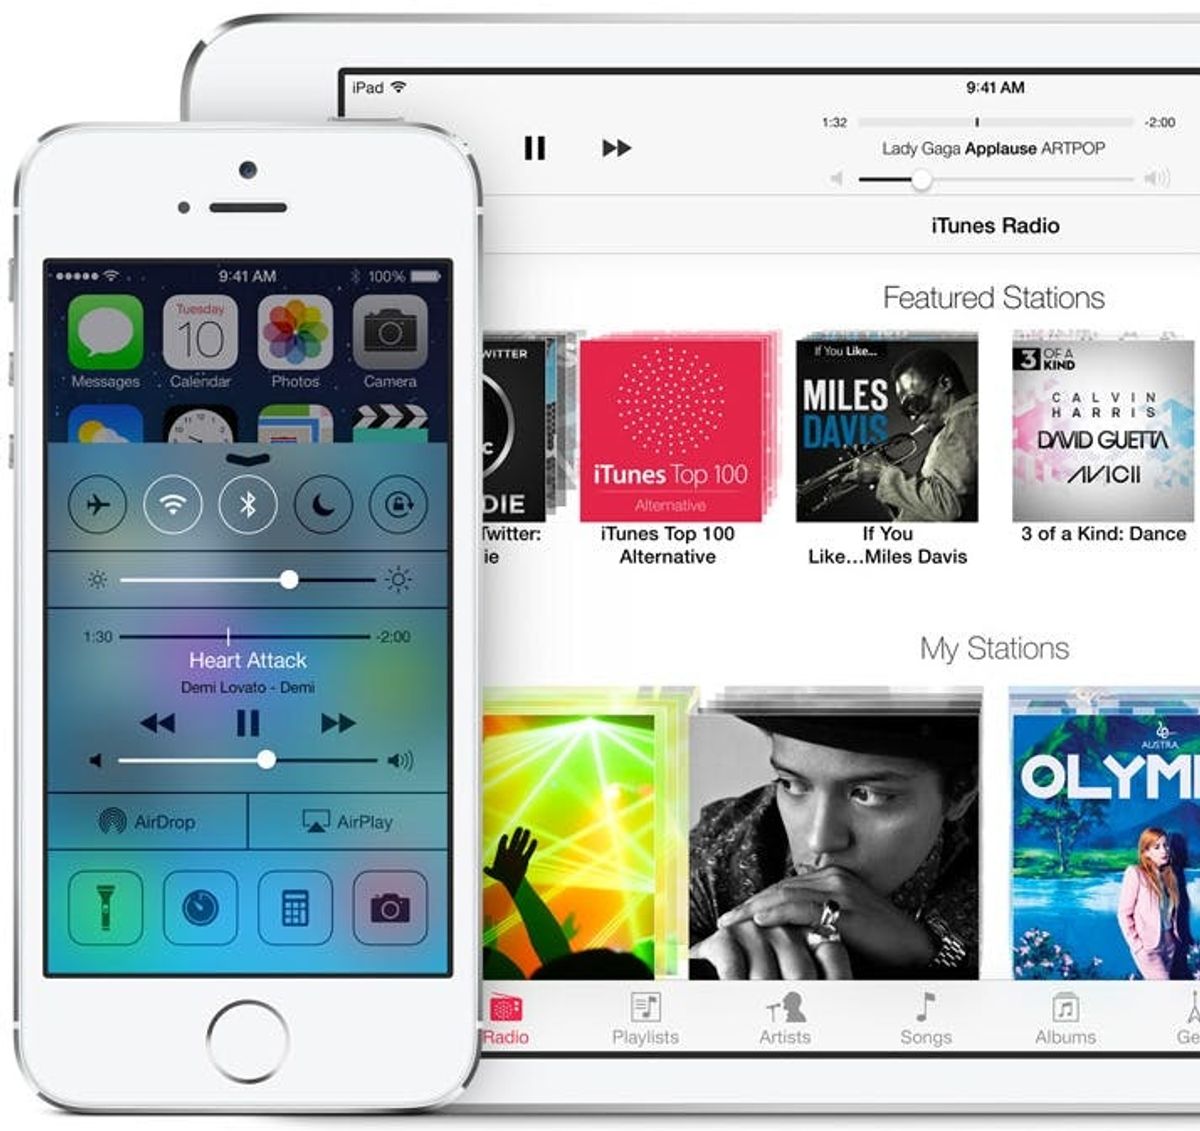 The 7 Things We Love About iOS 7